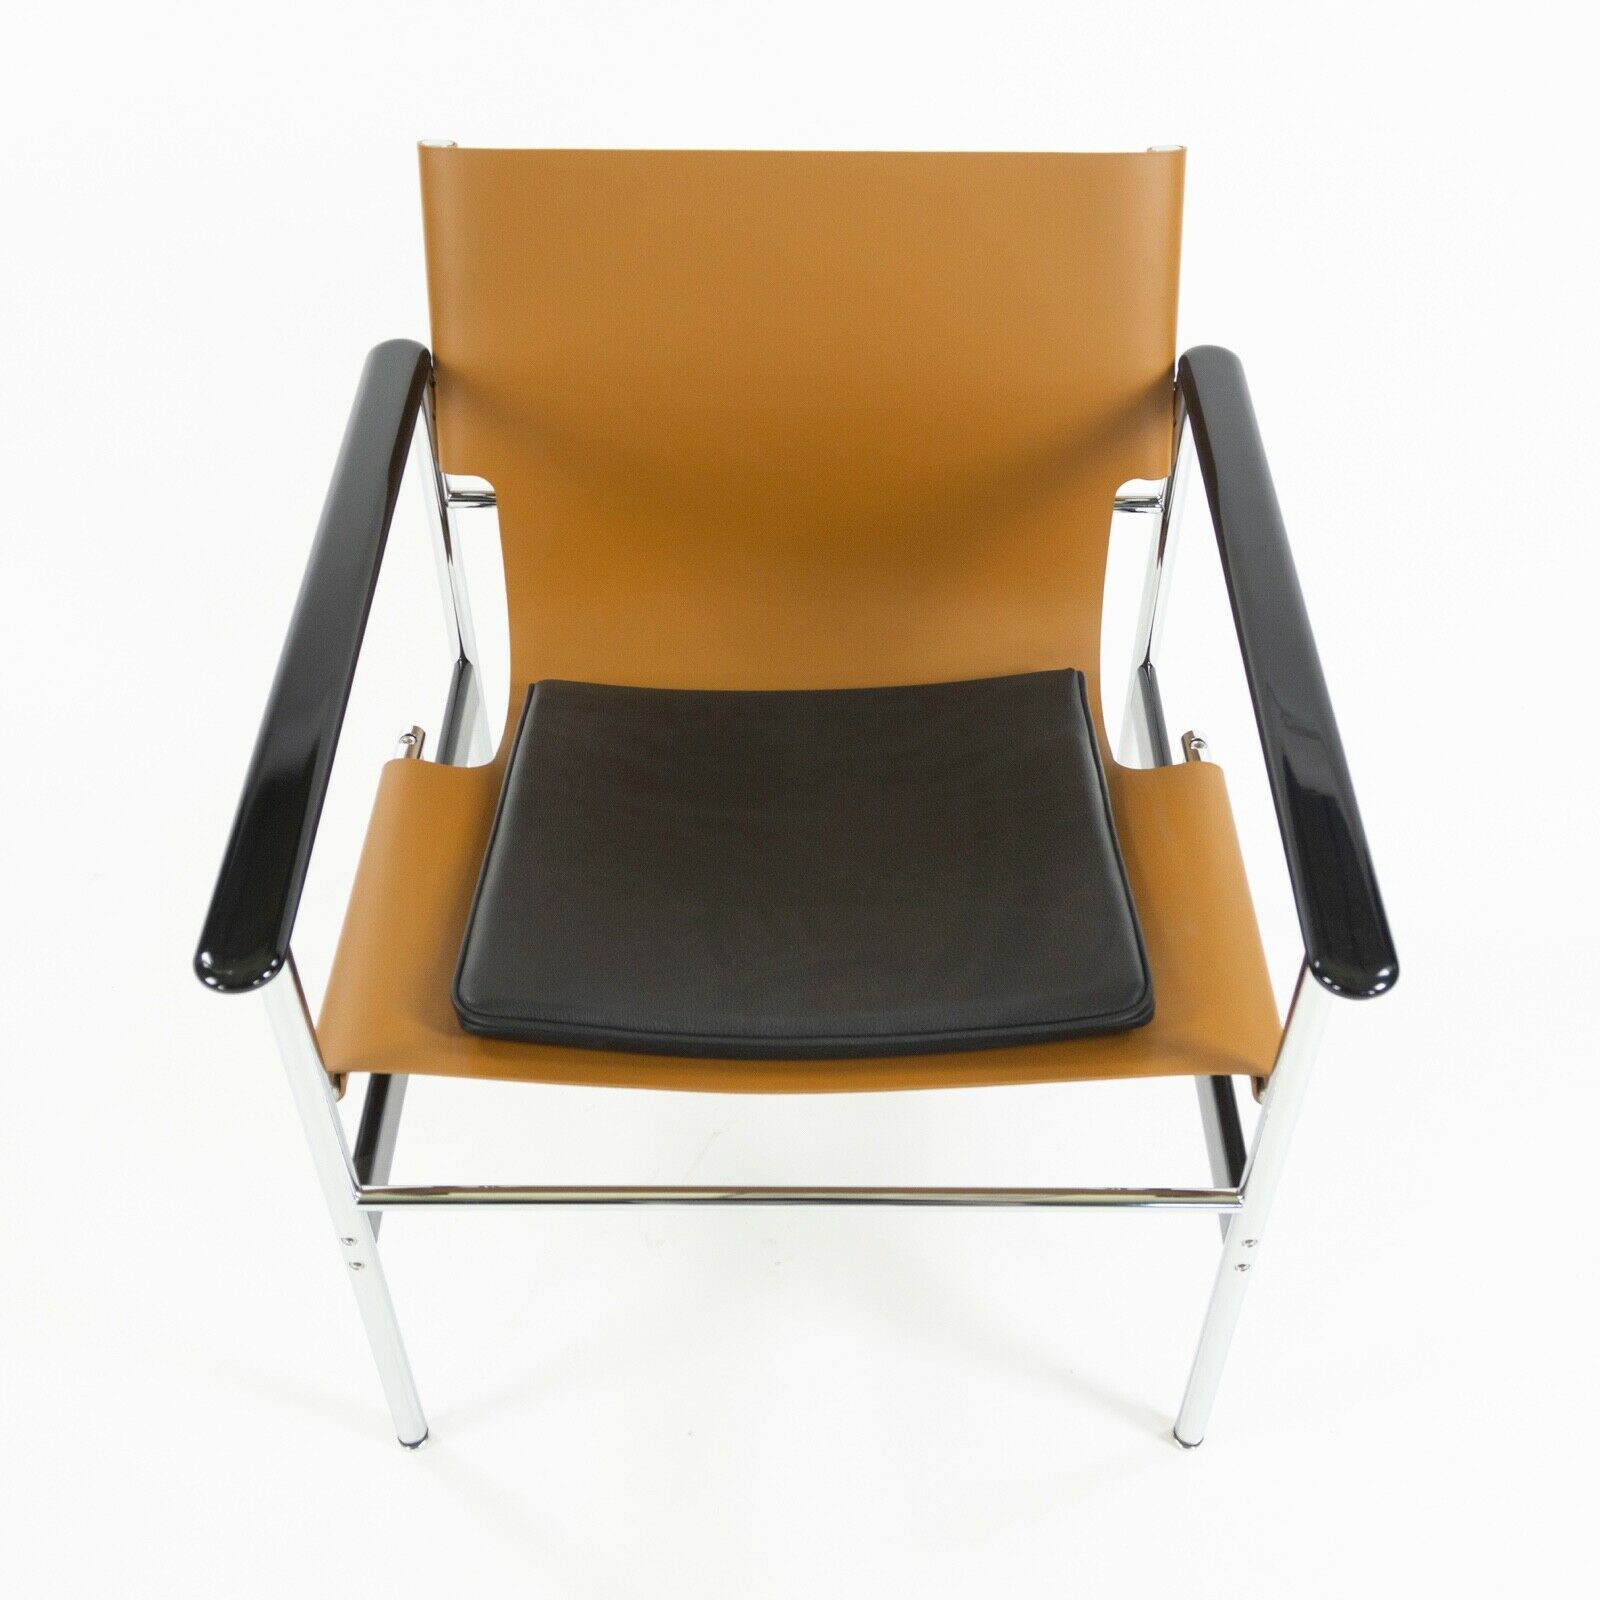 SOLD 2019 Knoll Charles Pollock Arm Chair Sling Cognac and Black Leather Chrome 657